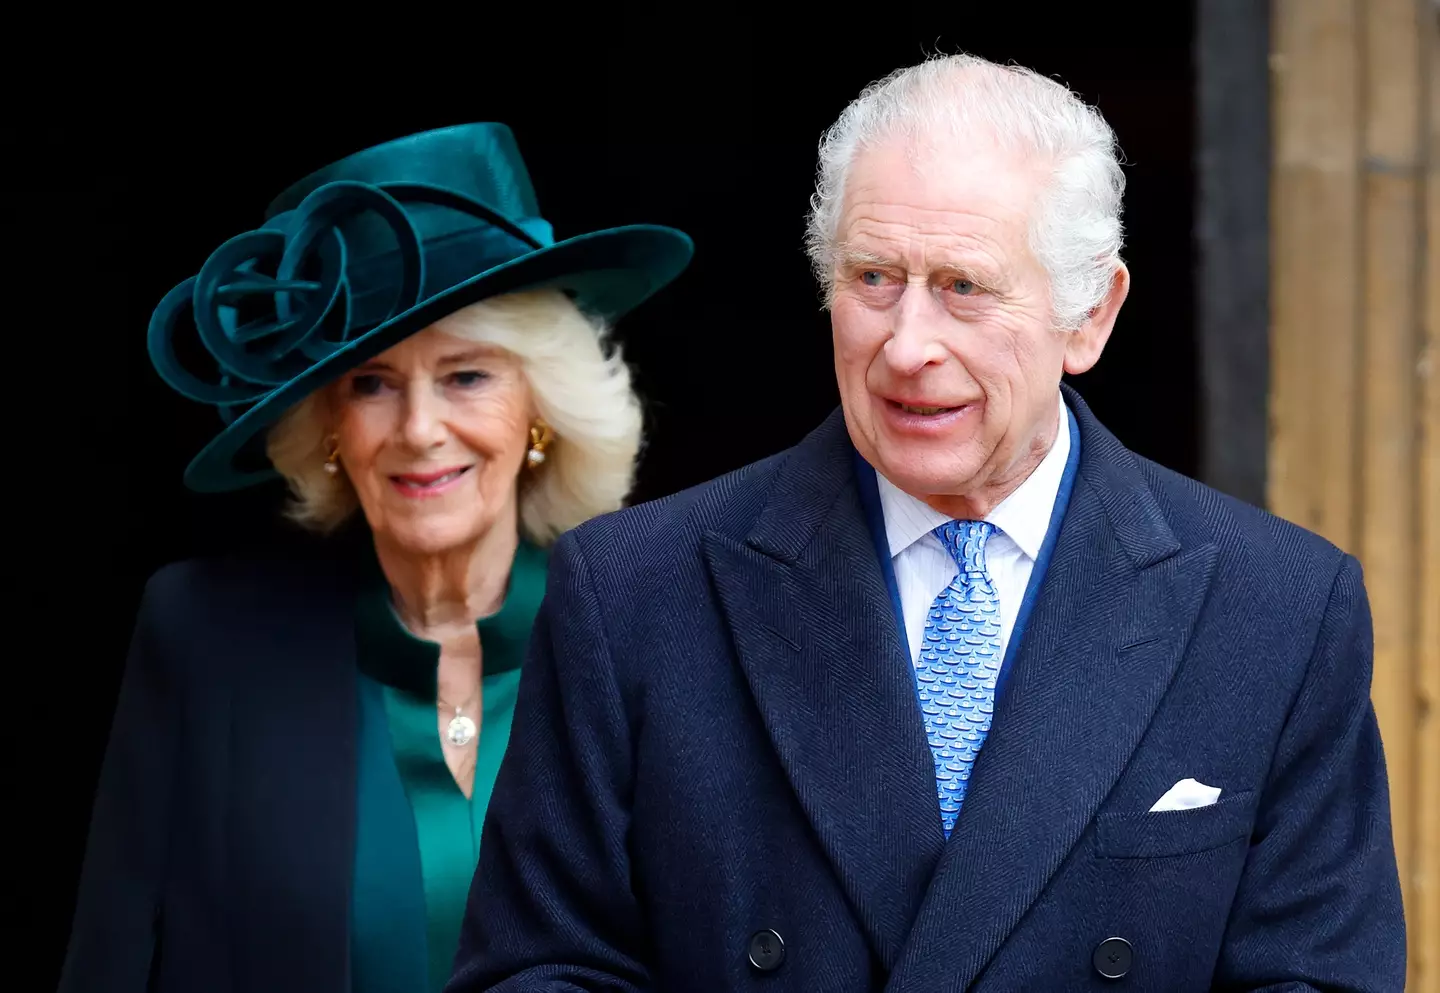 King Charles was diagnosed with cancer earlier this year. (Max Mumby/Indigo/Getty Images)